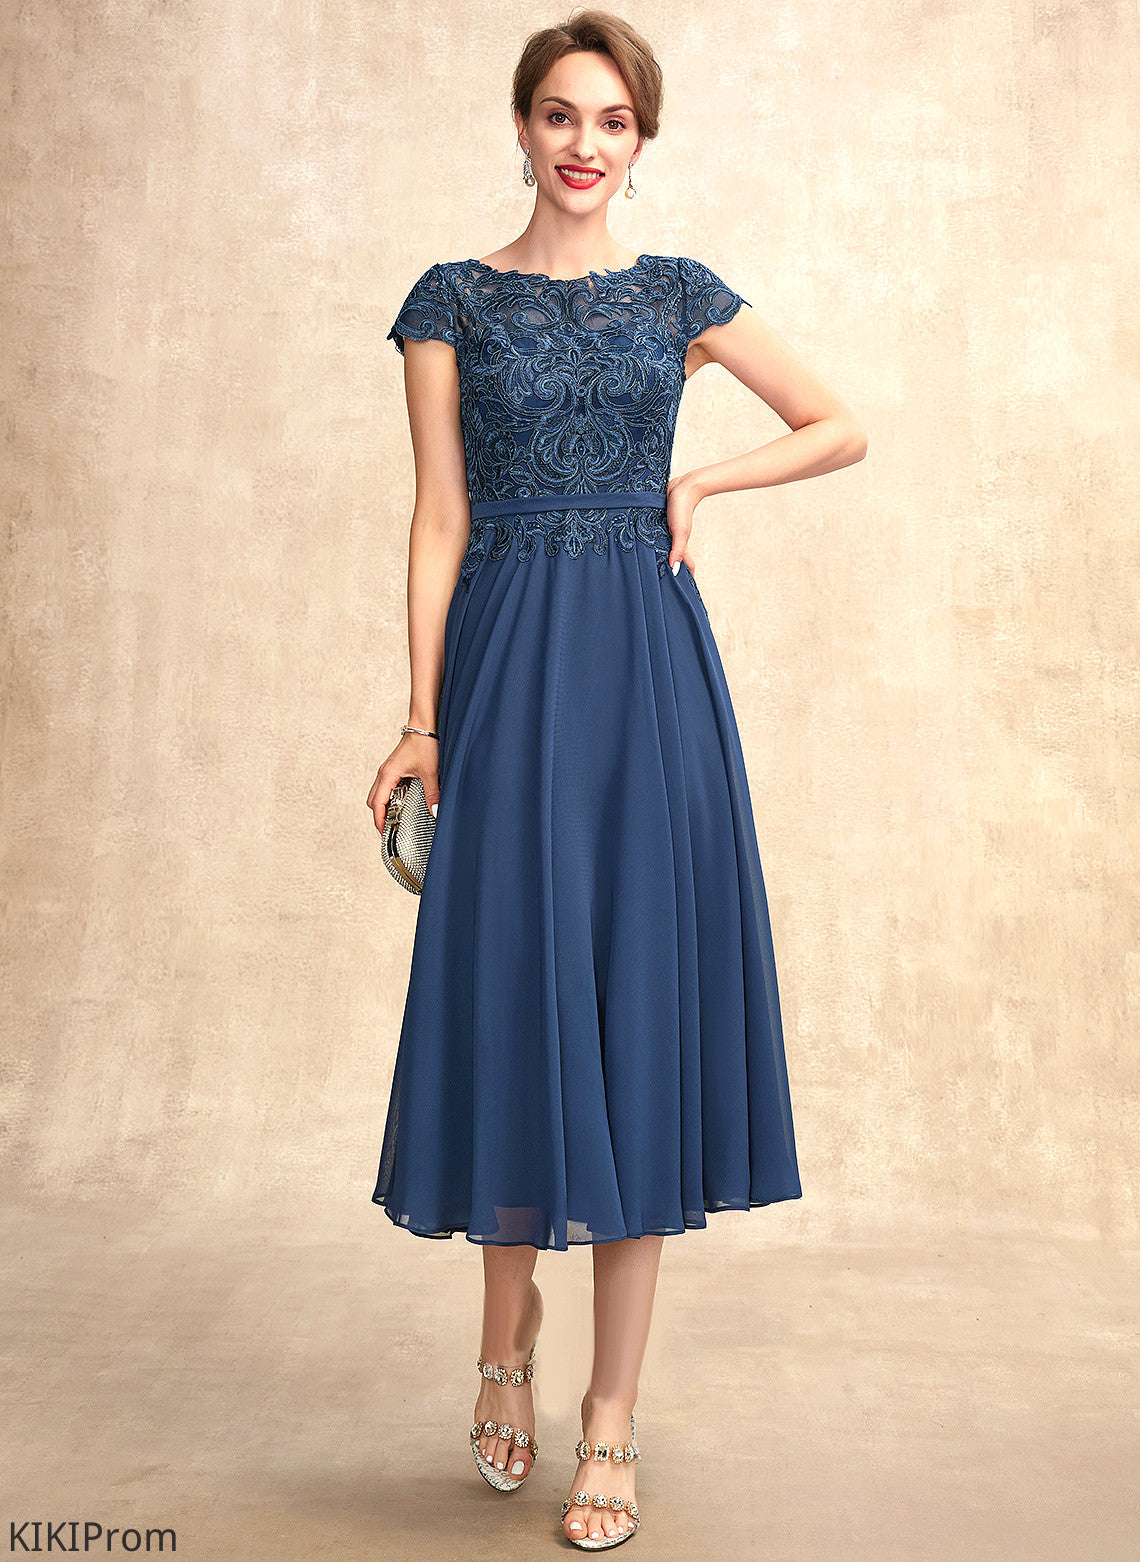 Mother of Chiffon the Gwen A-Line Tea-Length Lace Dress Scoop Bride Mother of the Bride Dresses Neck